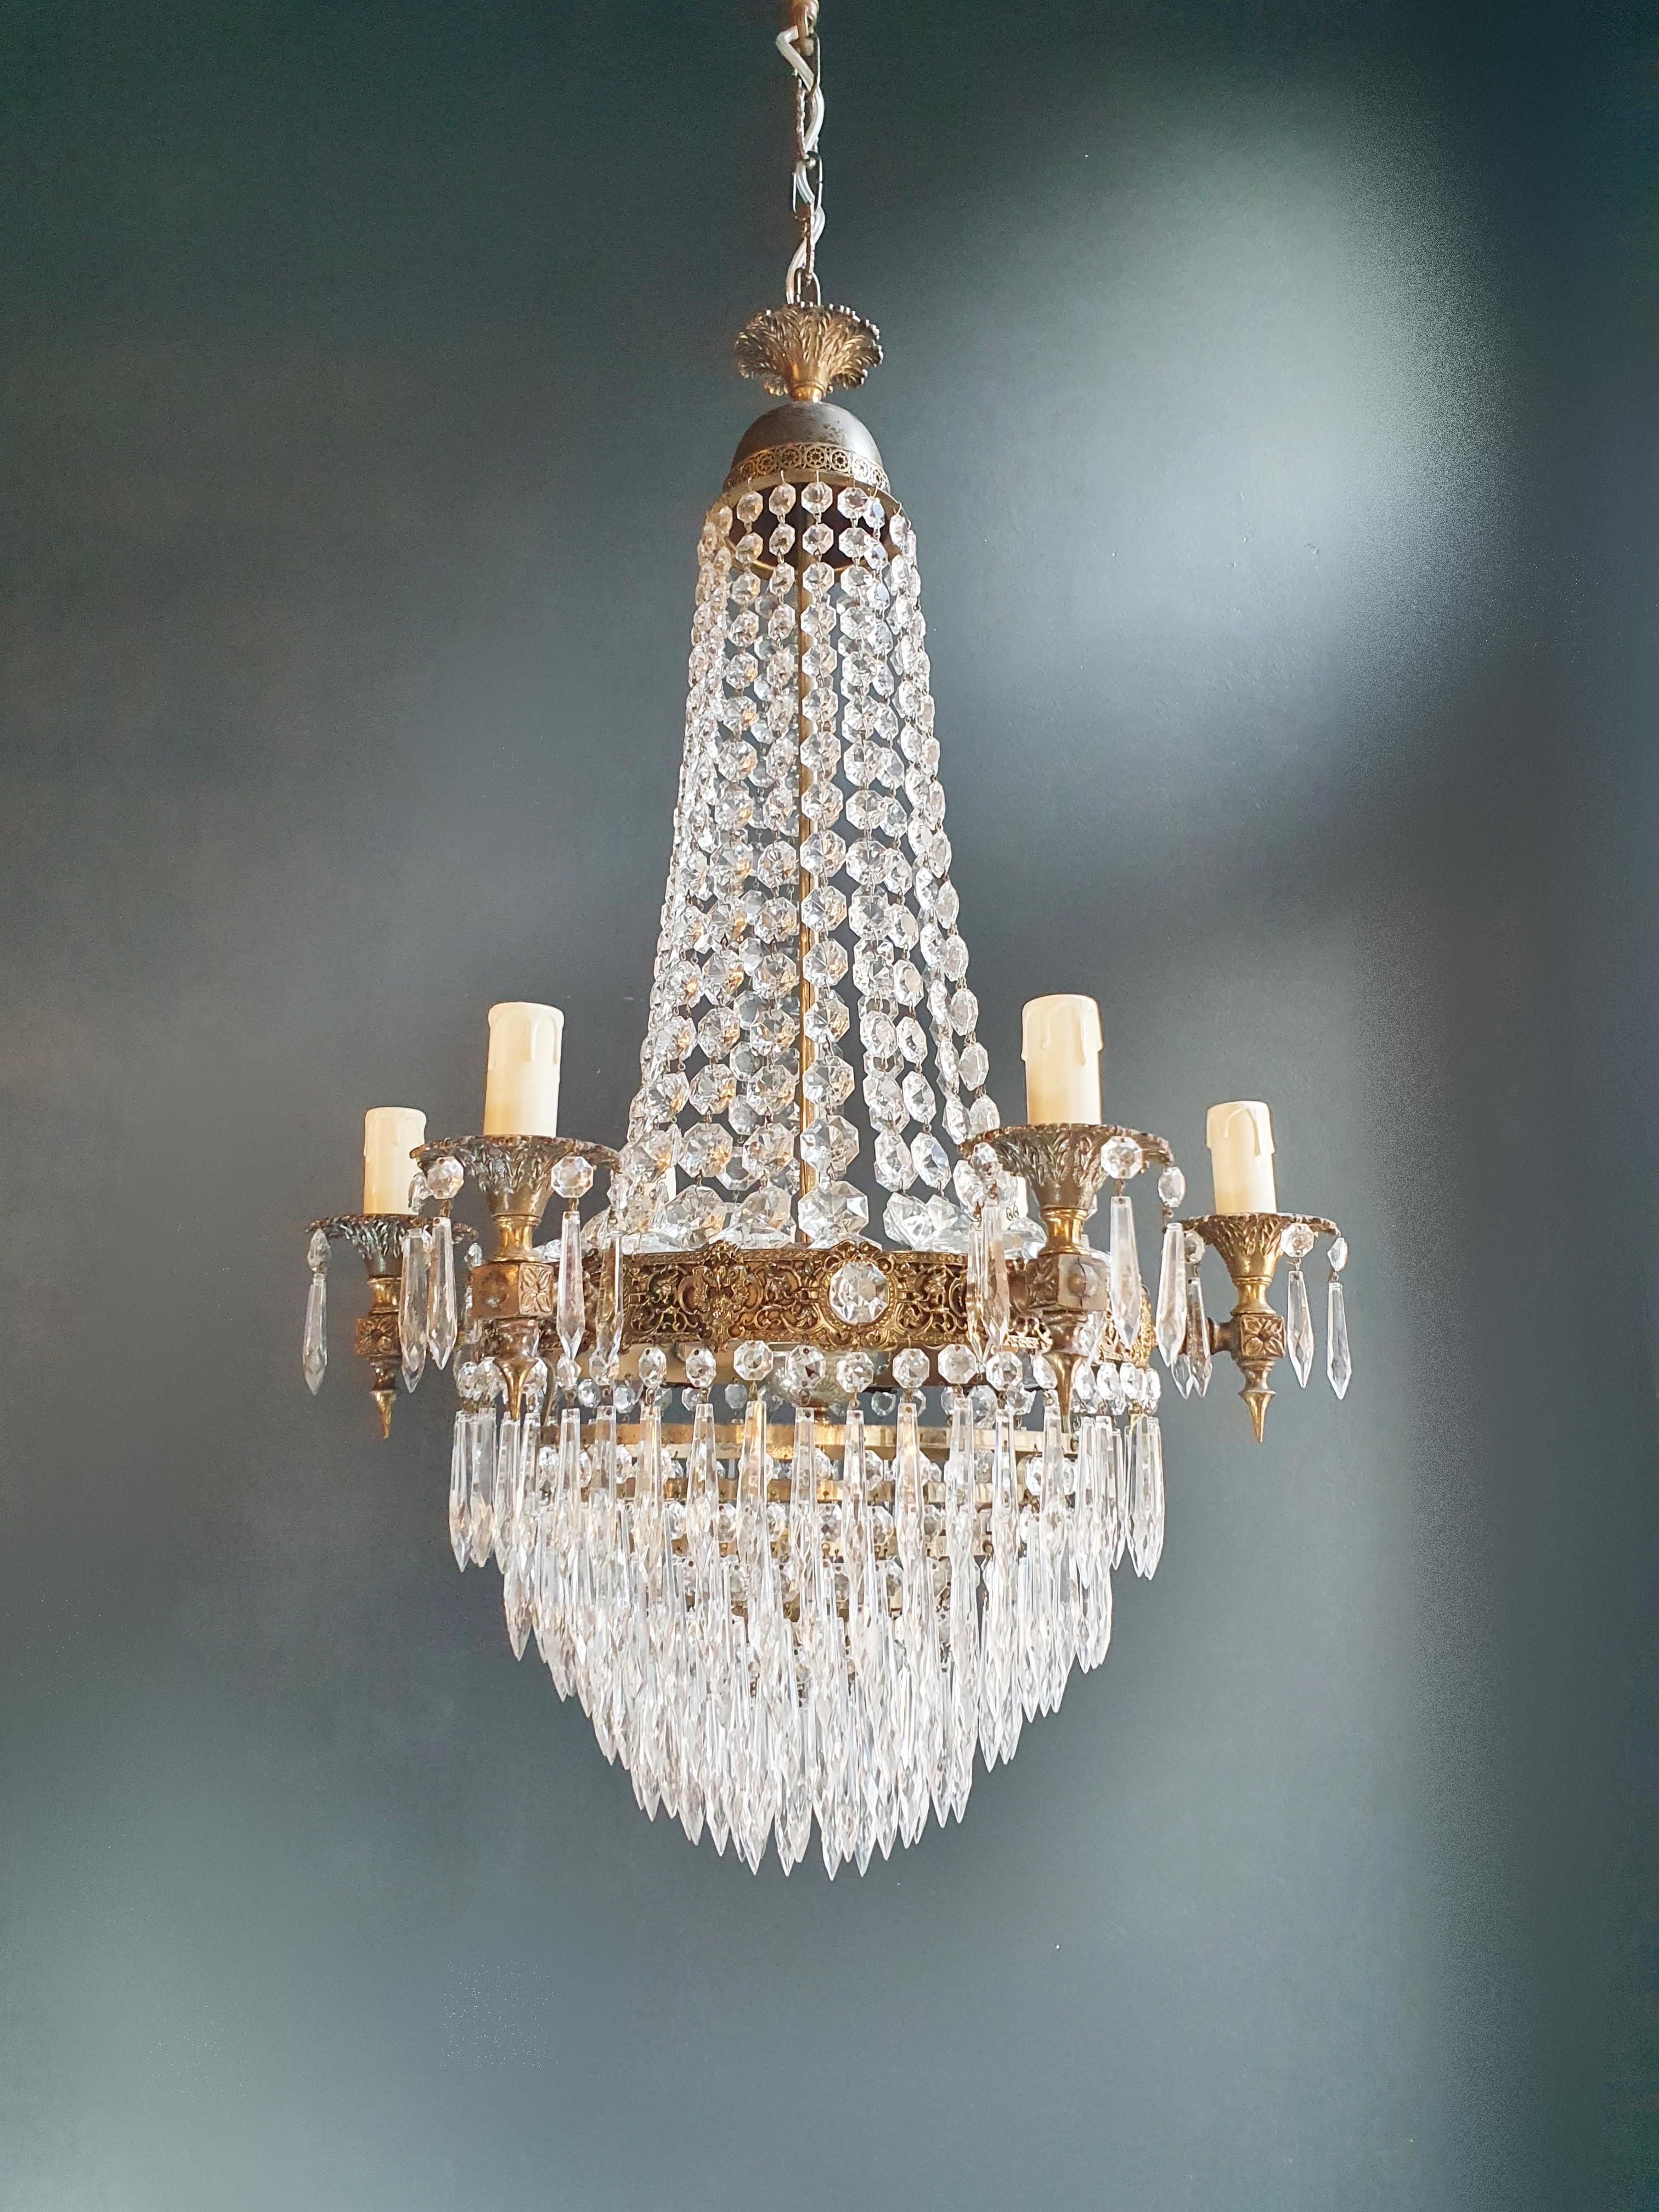 Empire Brass Sac a Pearl Chandelier Crystal Lustre Ceiling Antique 3